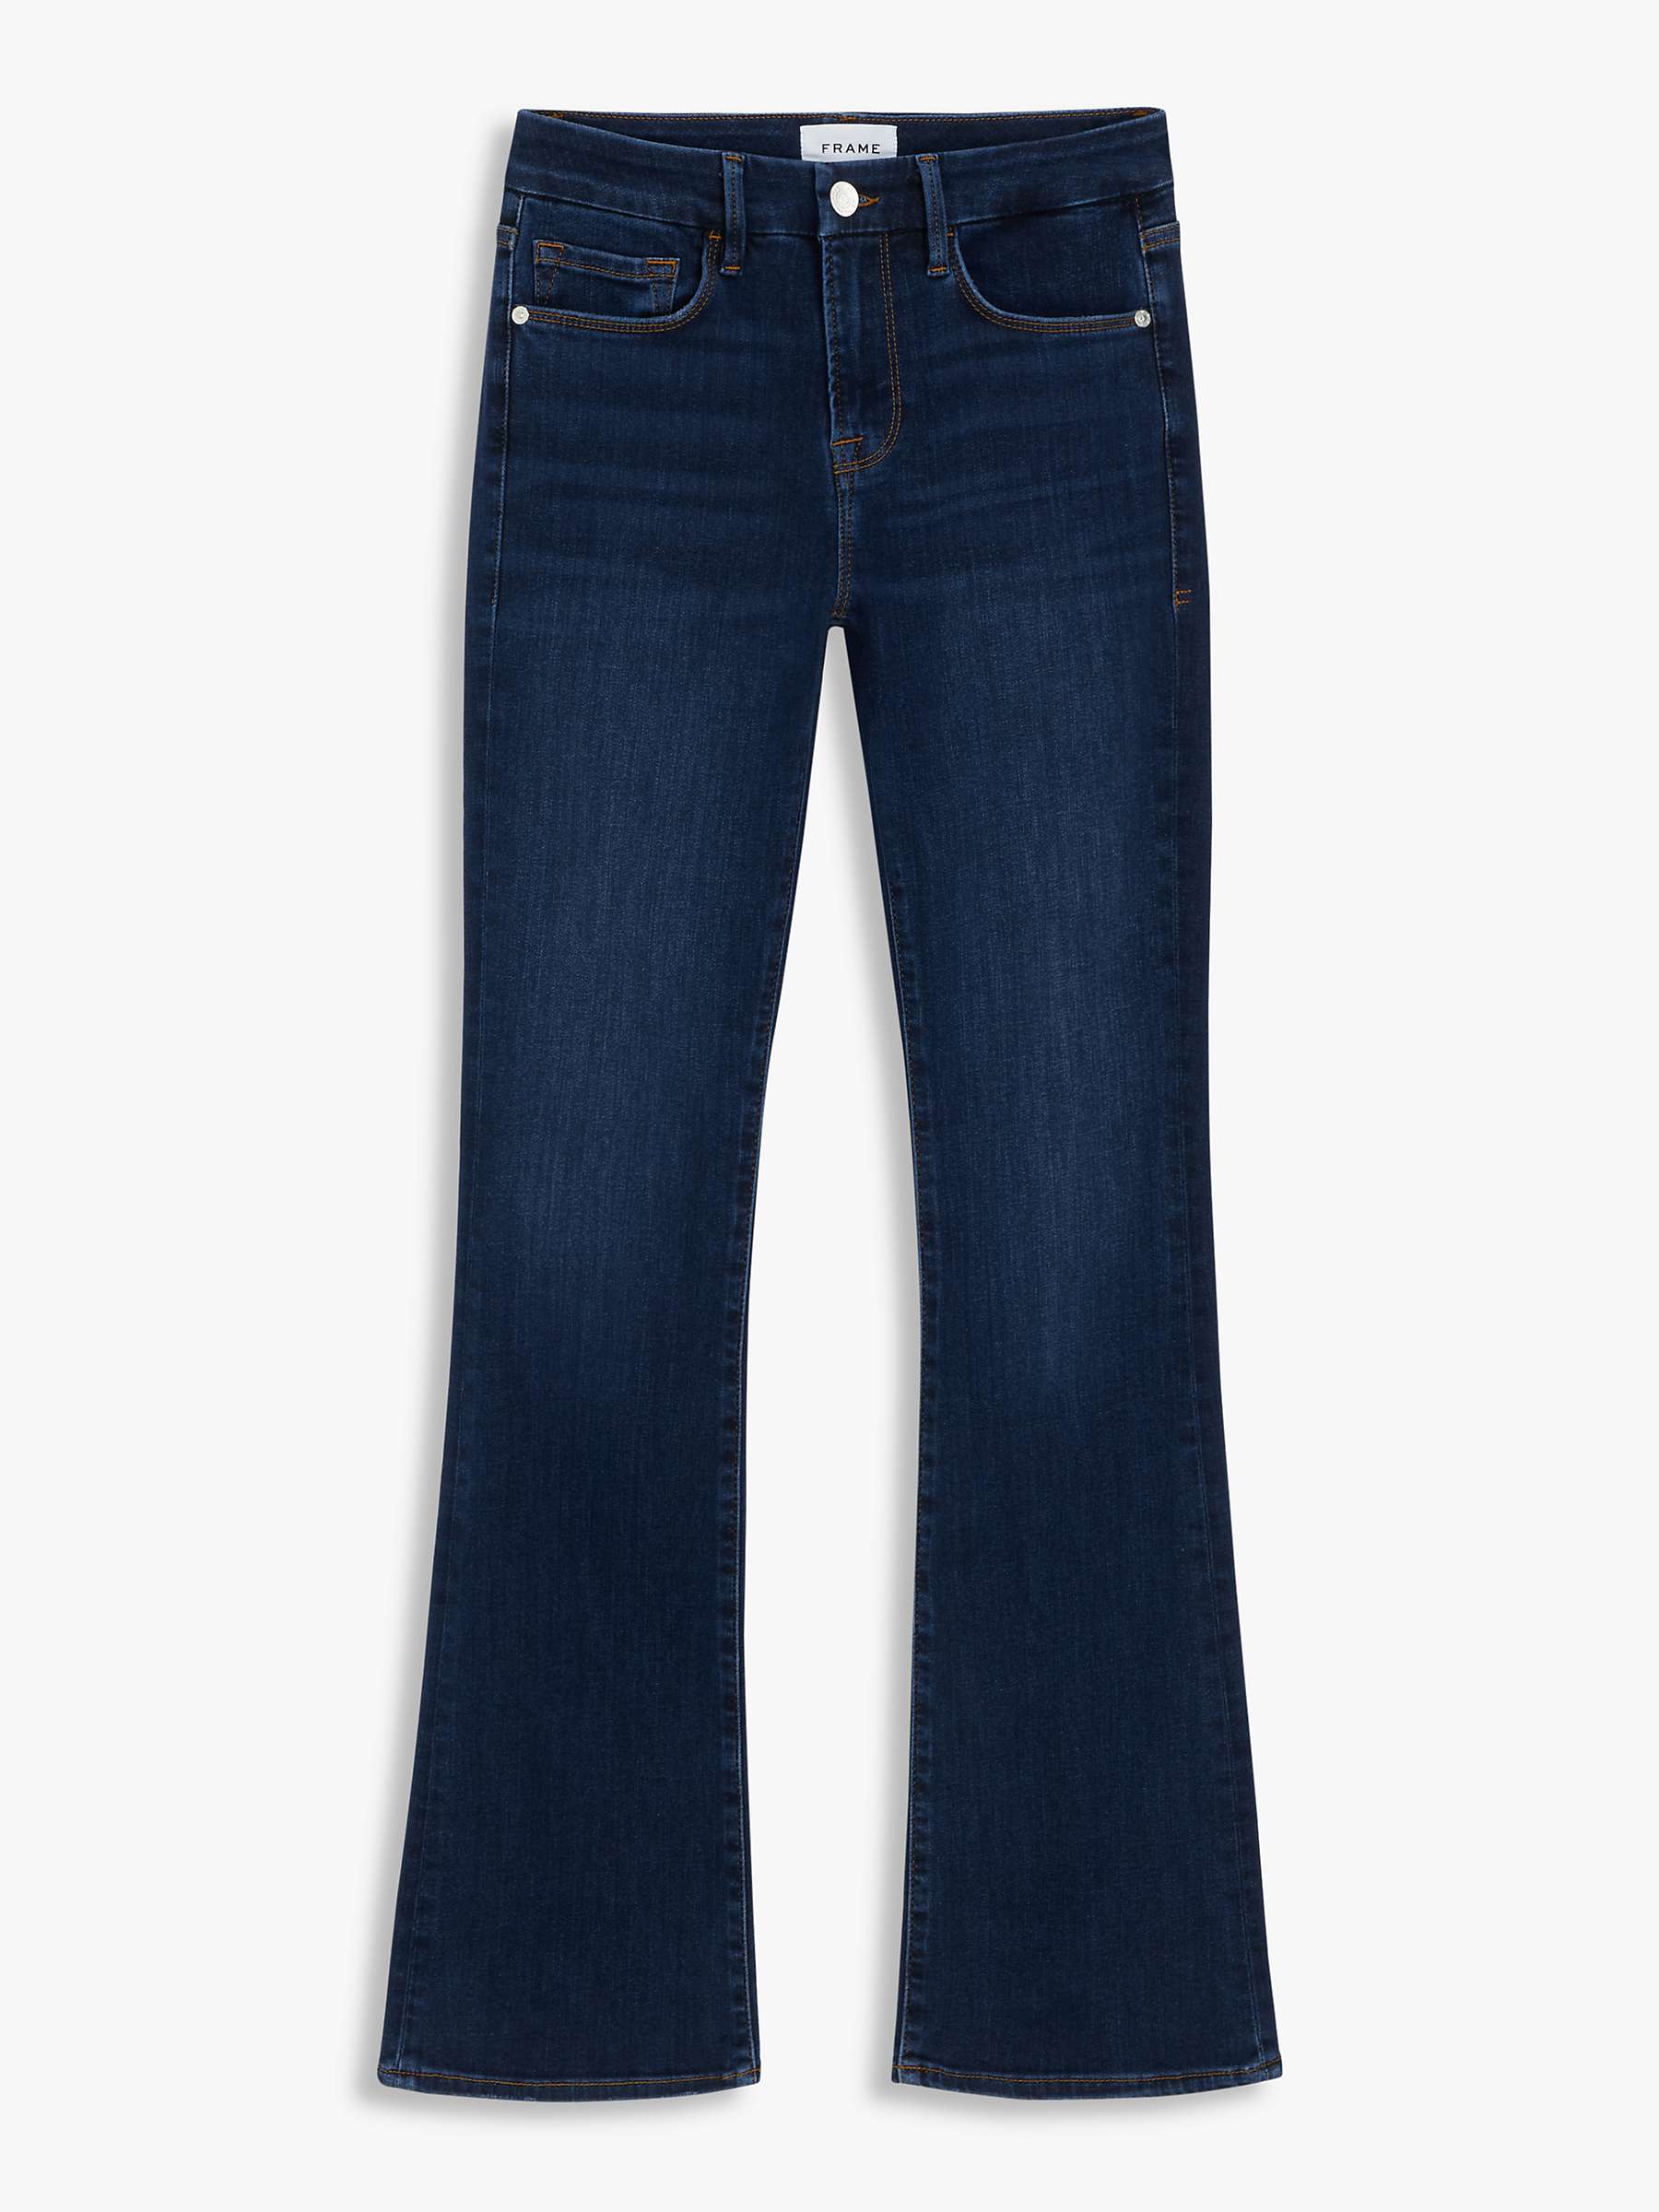 Buy FRAME Le Mini Bootcut Jeans, Majesty Online at johnlewis.com